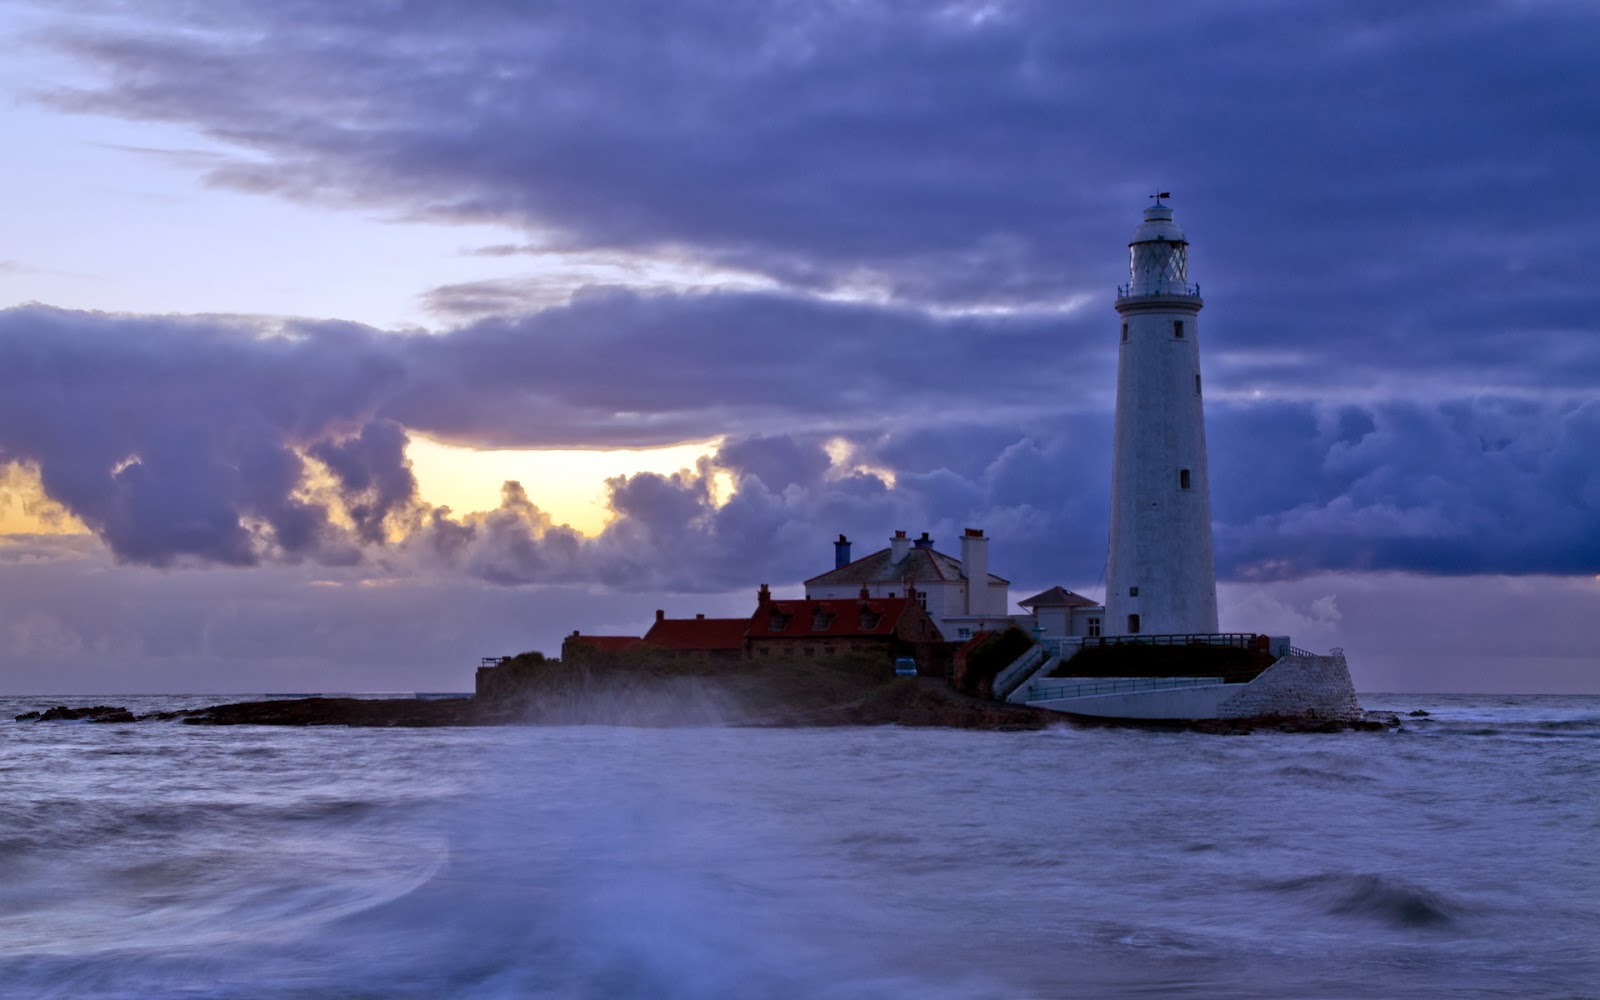 Mary S Lighthouse - St Marys Lighthouse Whitley Bay - HD Wallpaper 